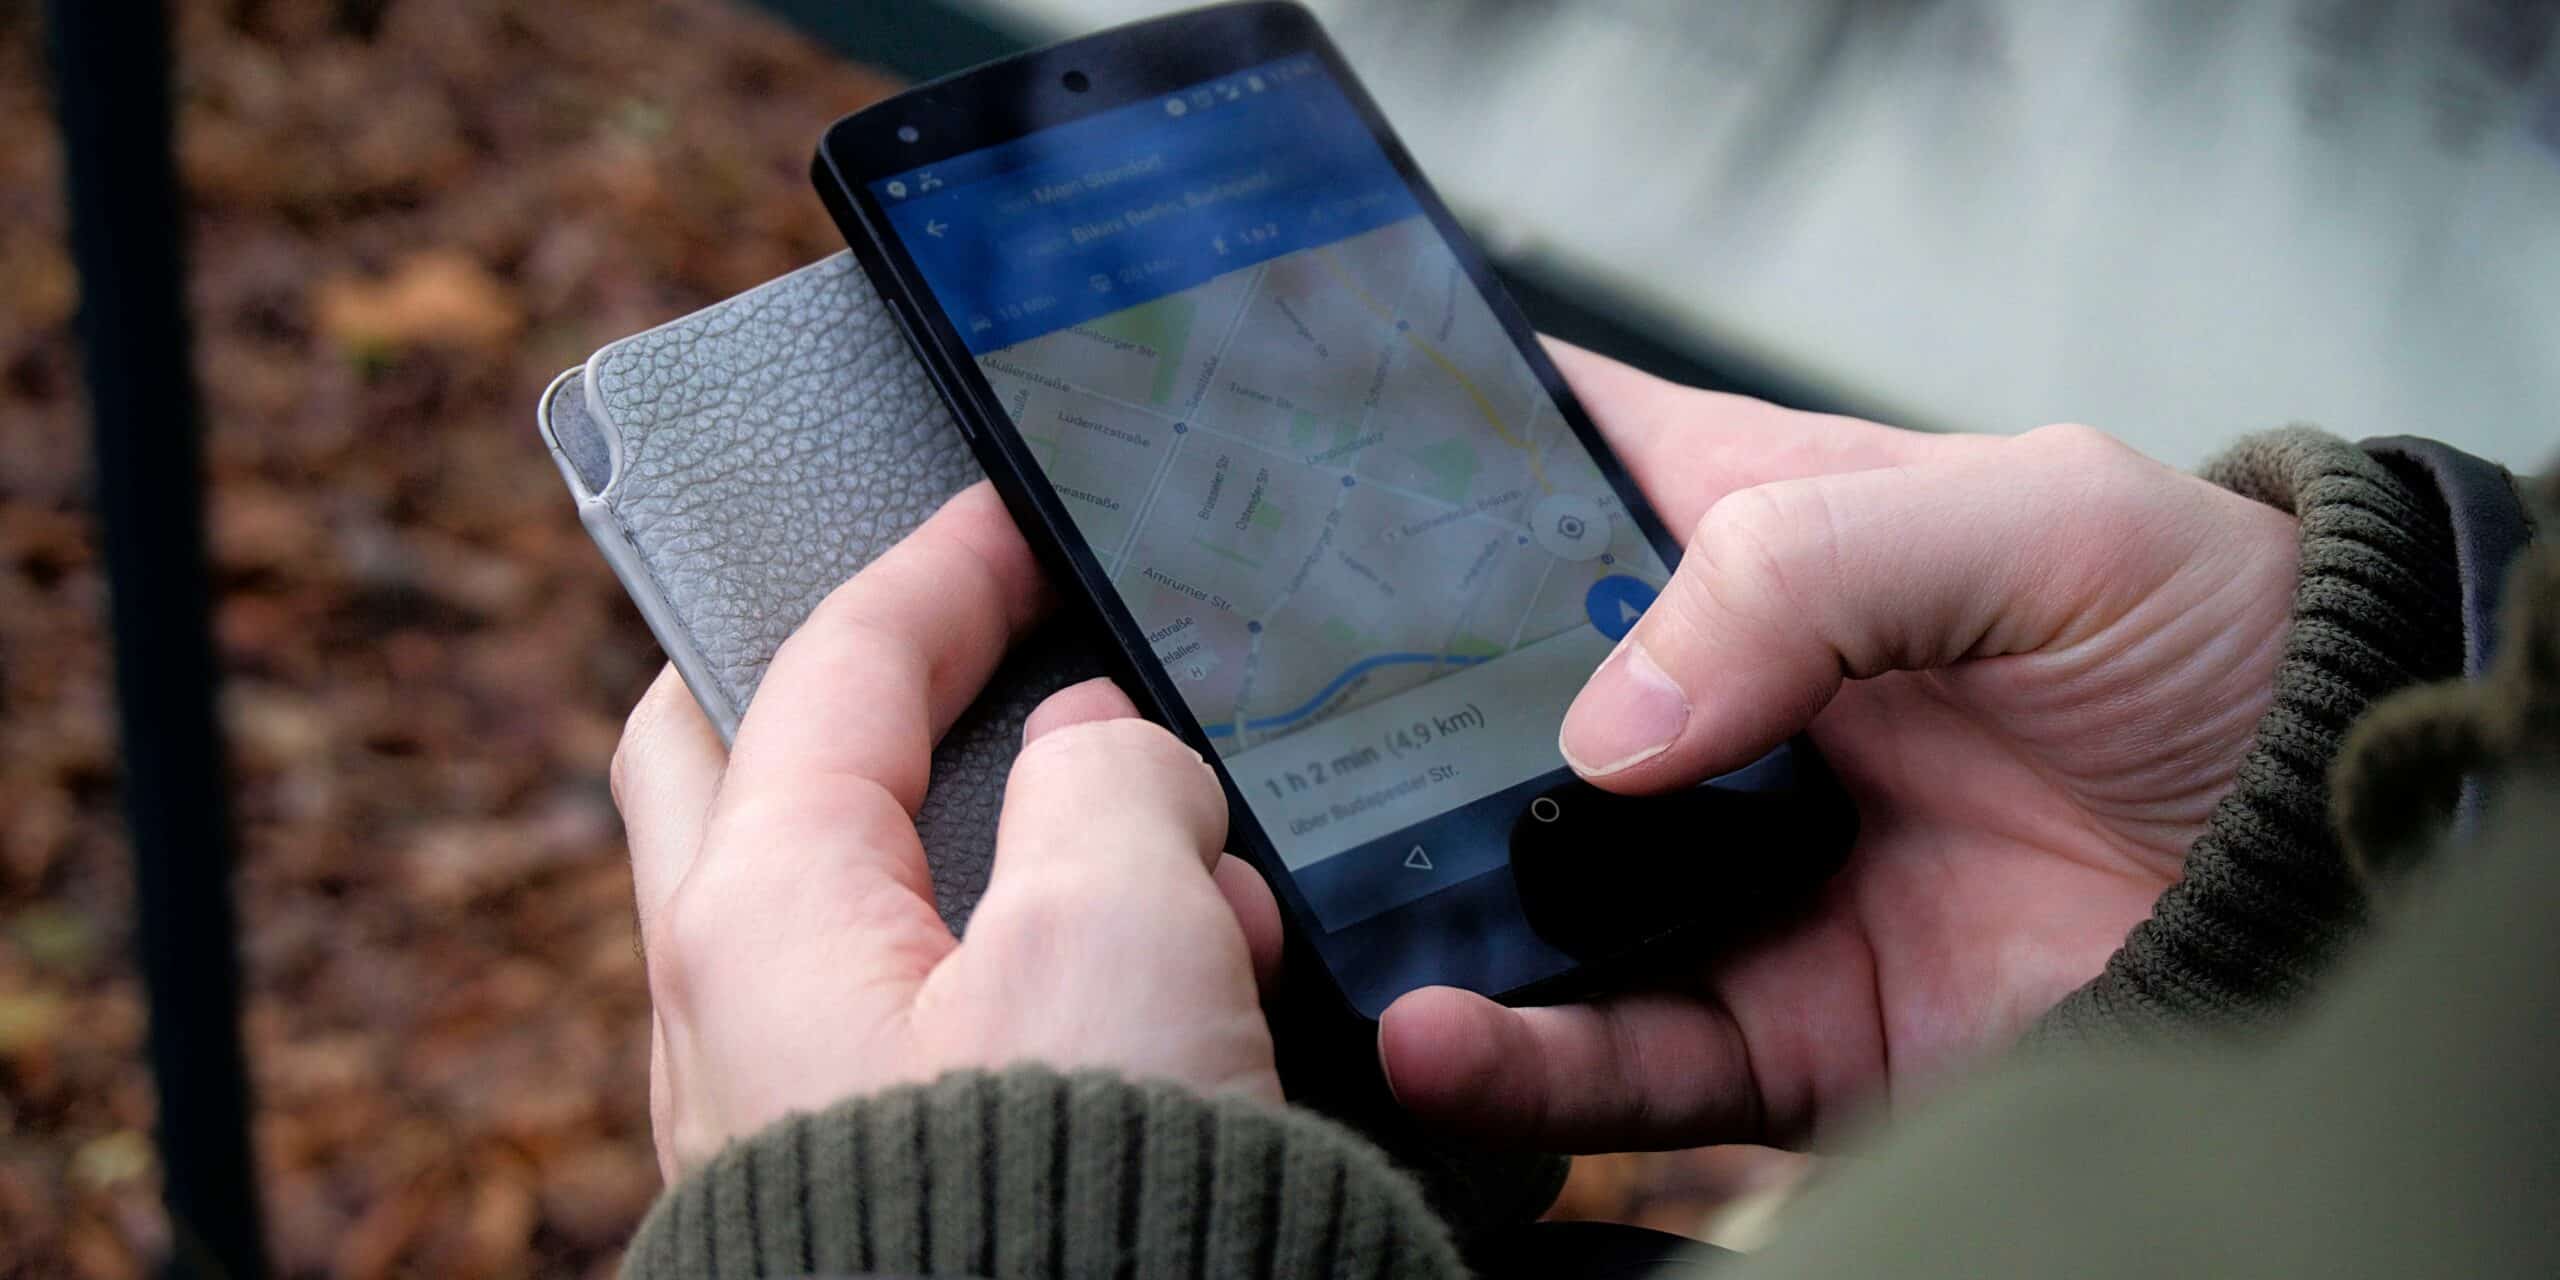 Person holding phone using Google Maps to find local location